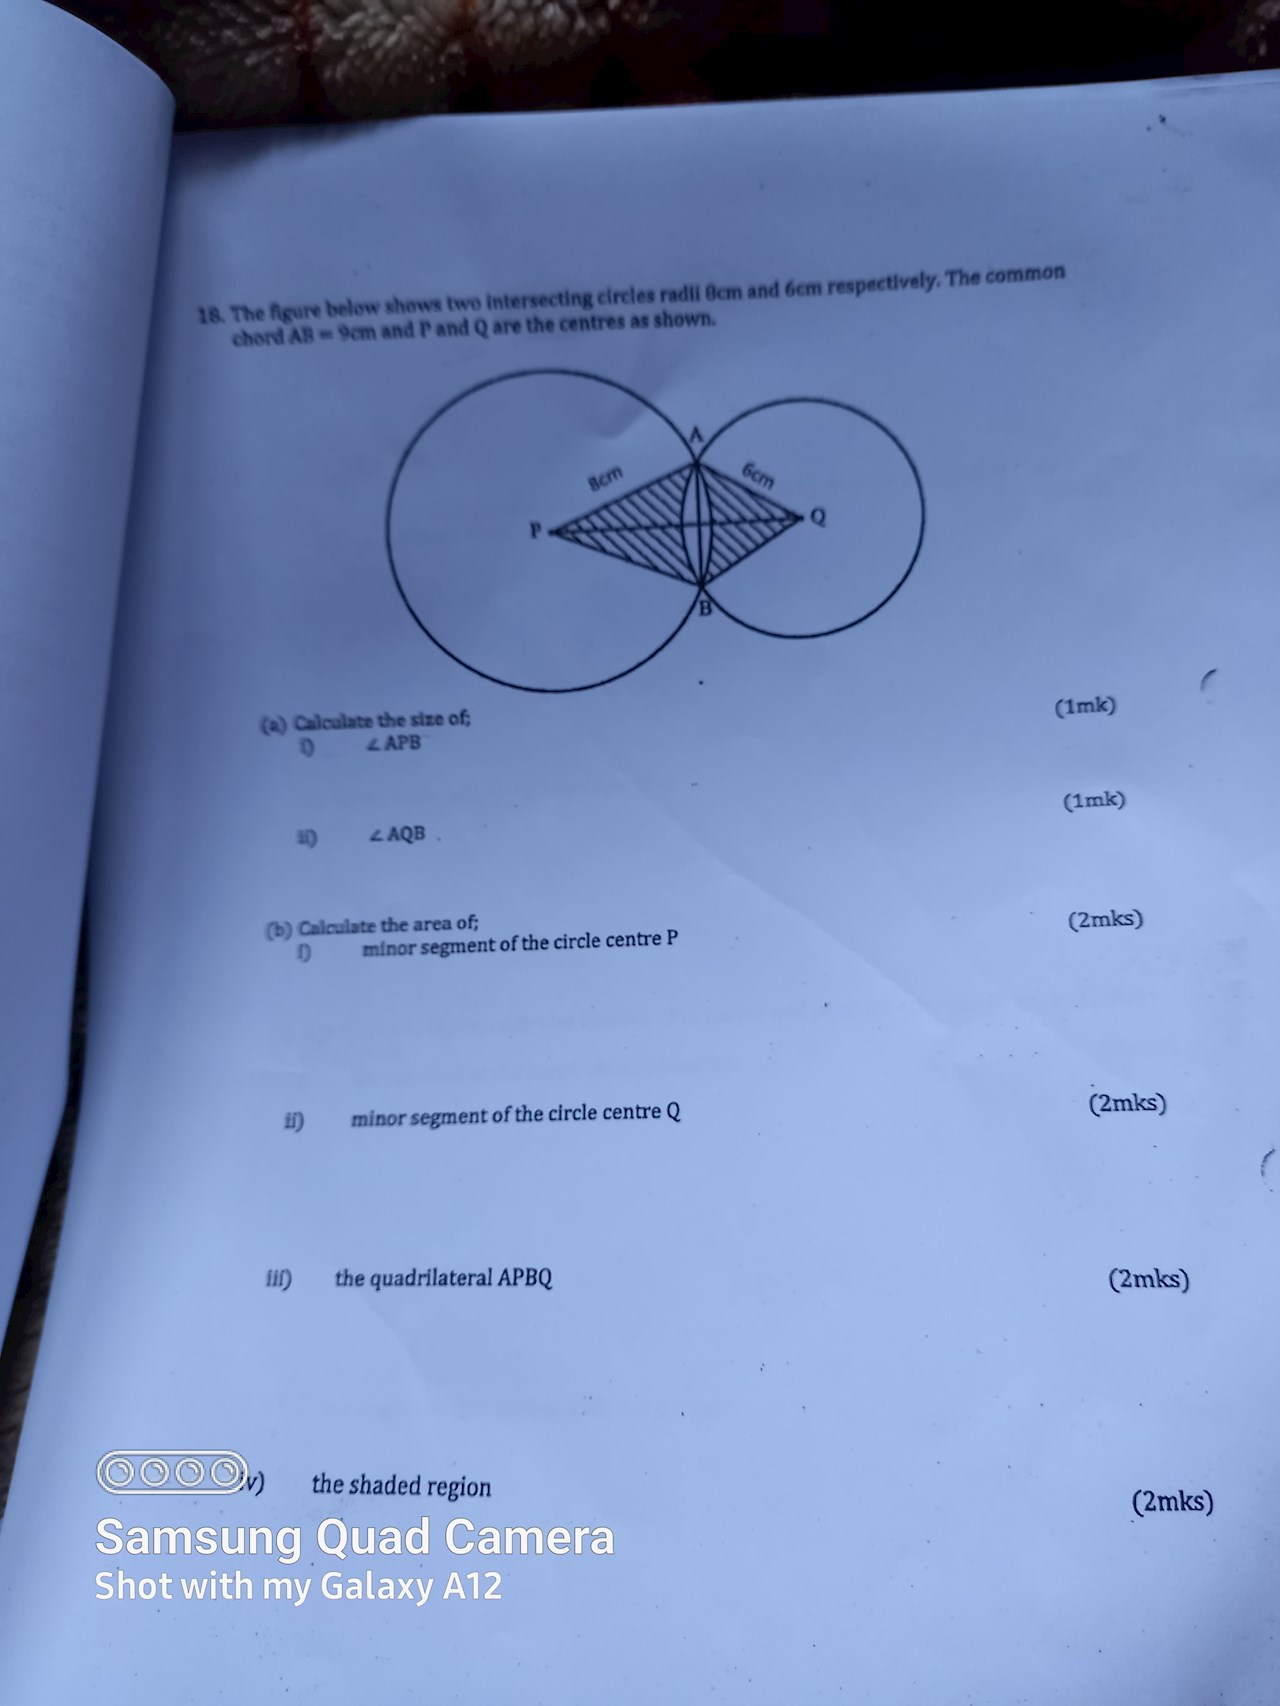 I want to know how to work this question  it has been disturbing  me iven in class's and any other many question  my teacher has taught me bat I haven't understood  it better  I could like your help?